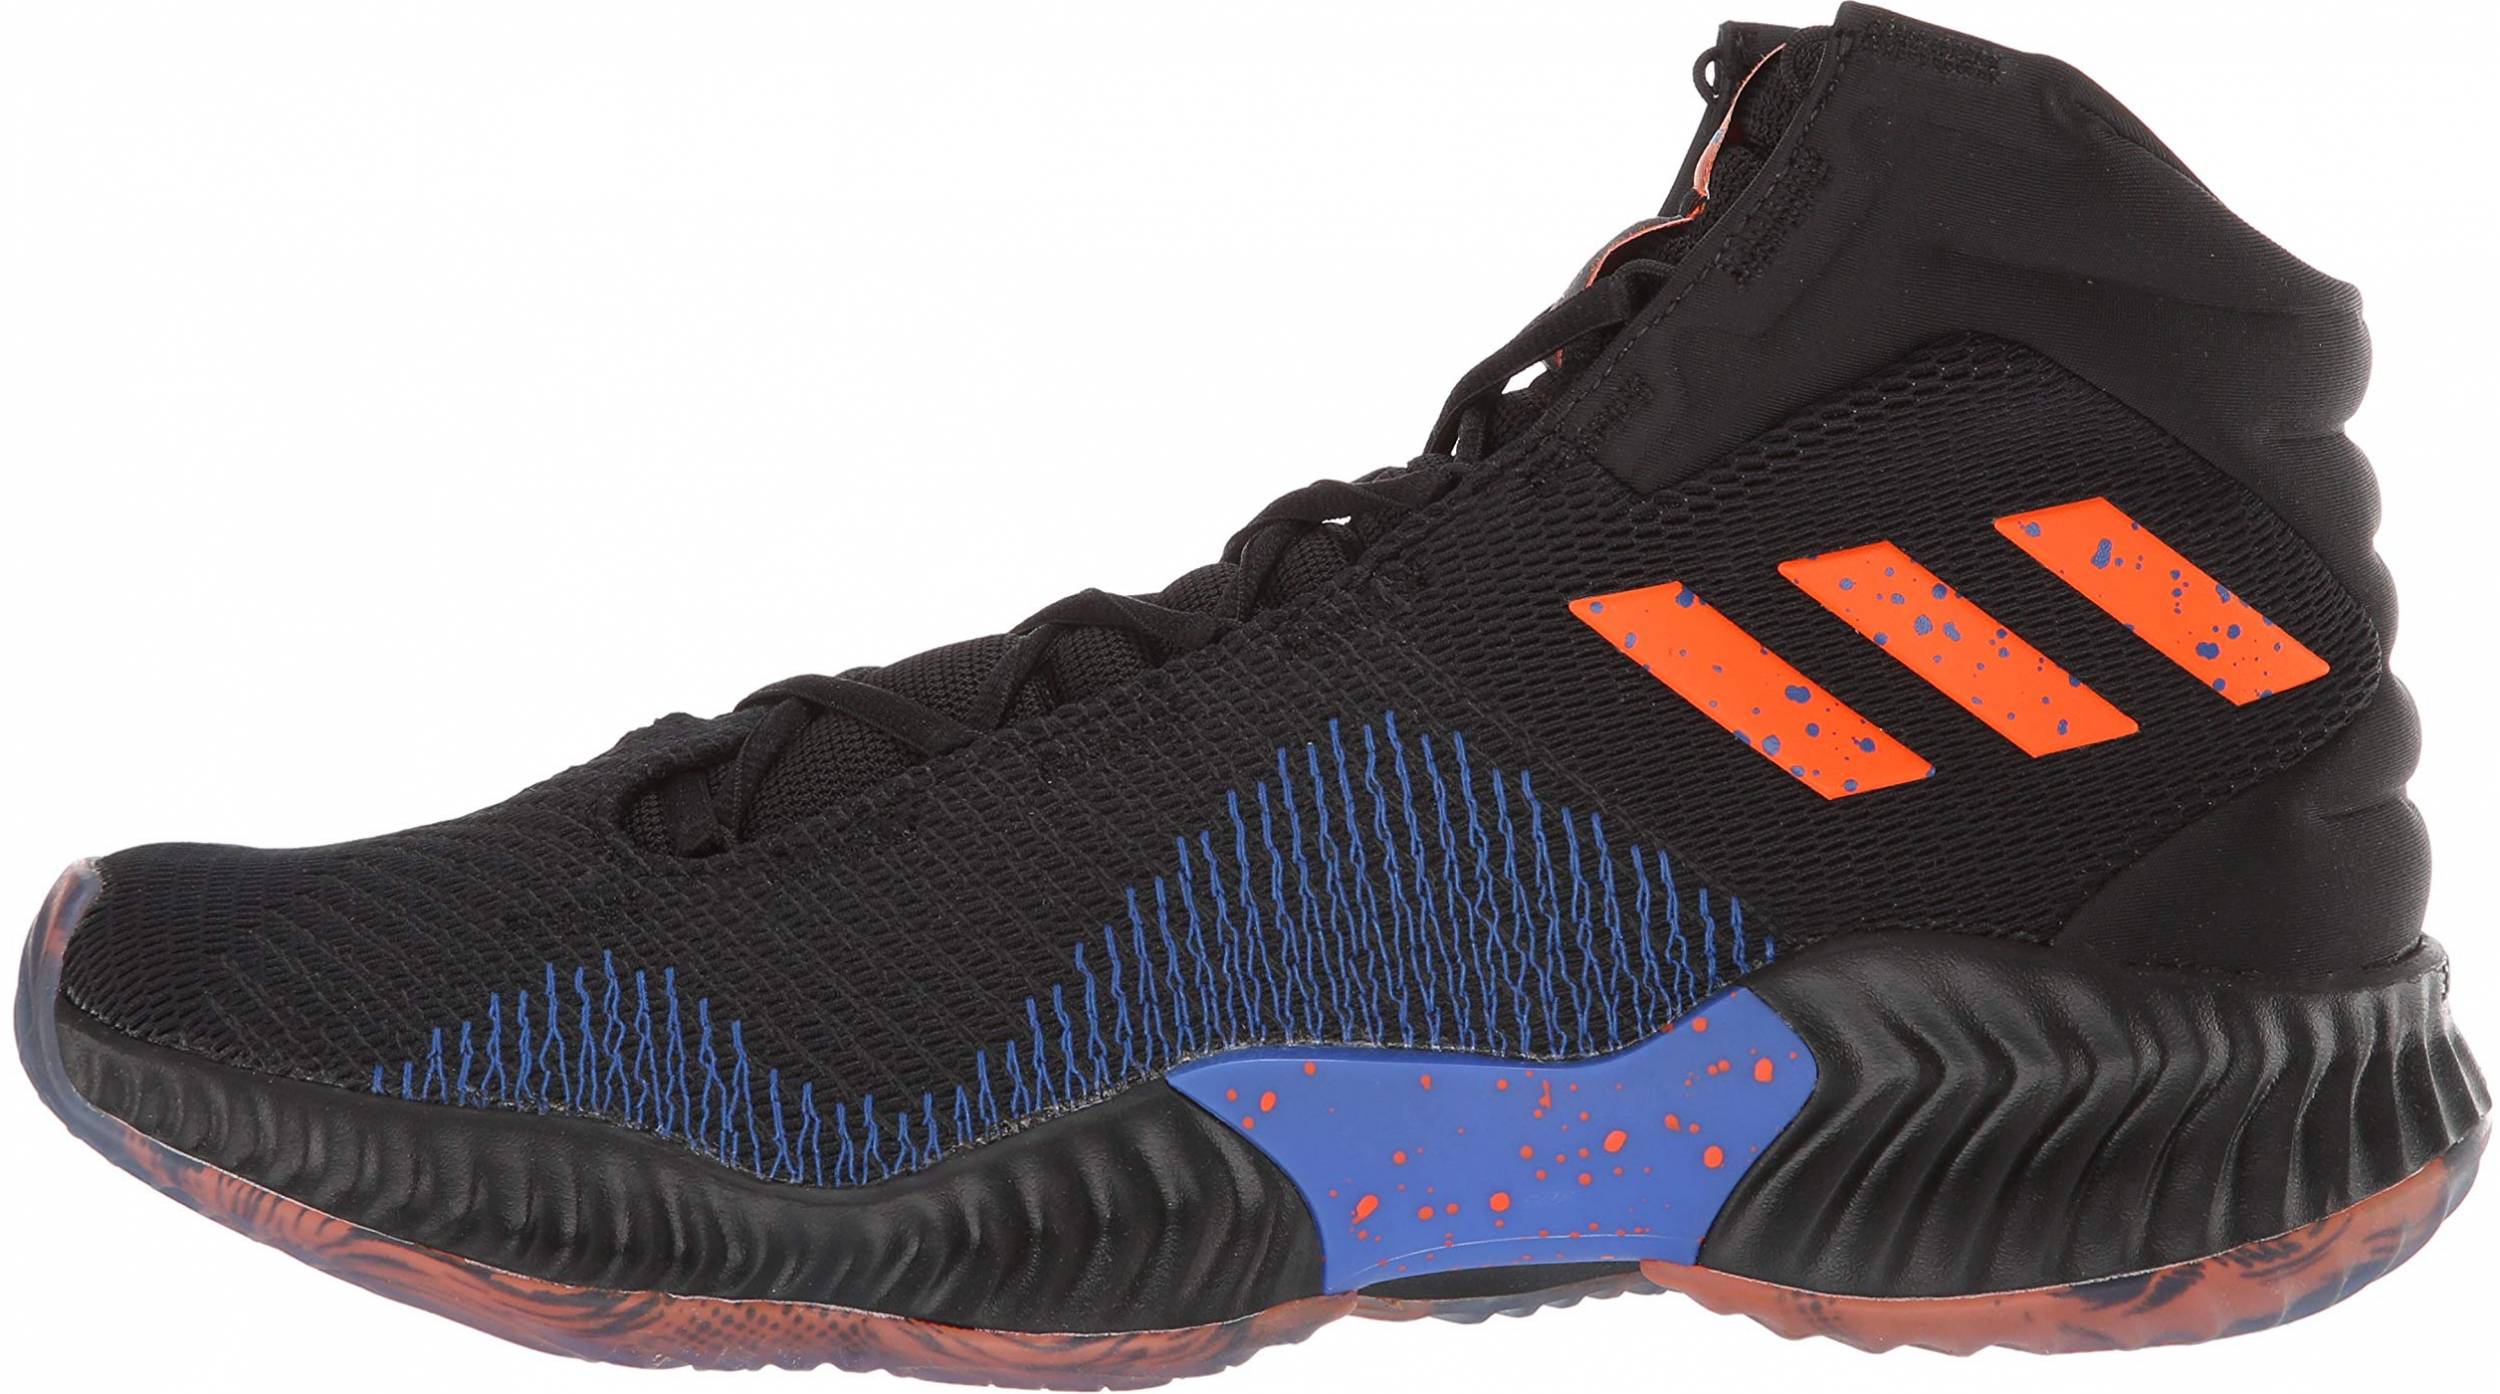 mischief in the meantime moderately Adidas Pro Bounce 2018 Review 2023, Facts, Deals ($20) | RunRepeat